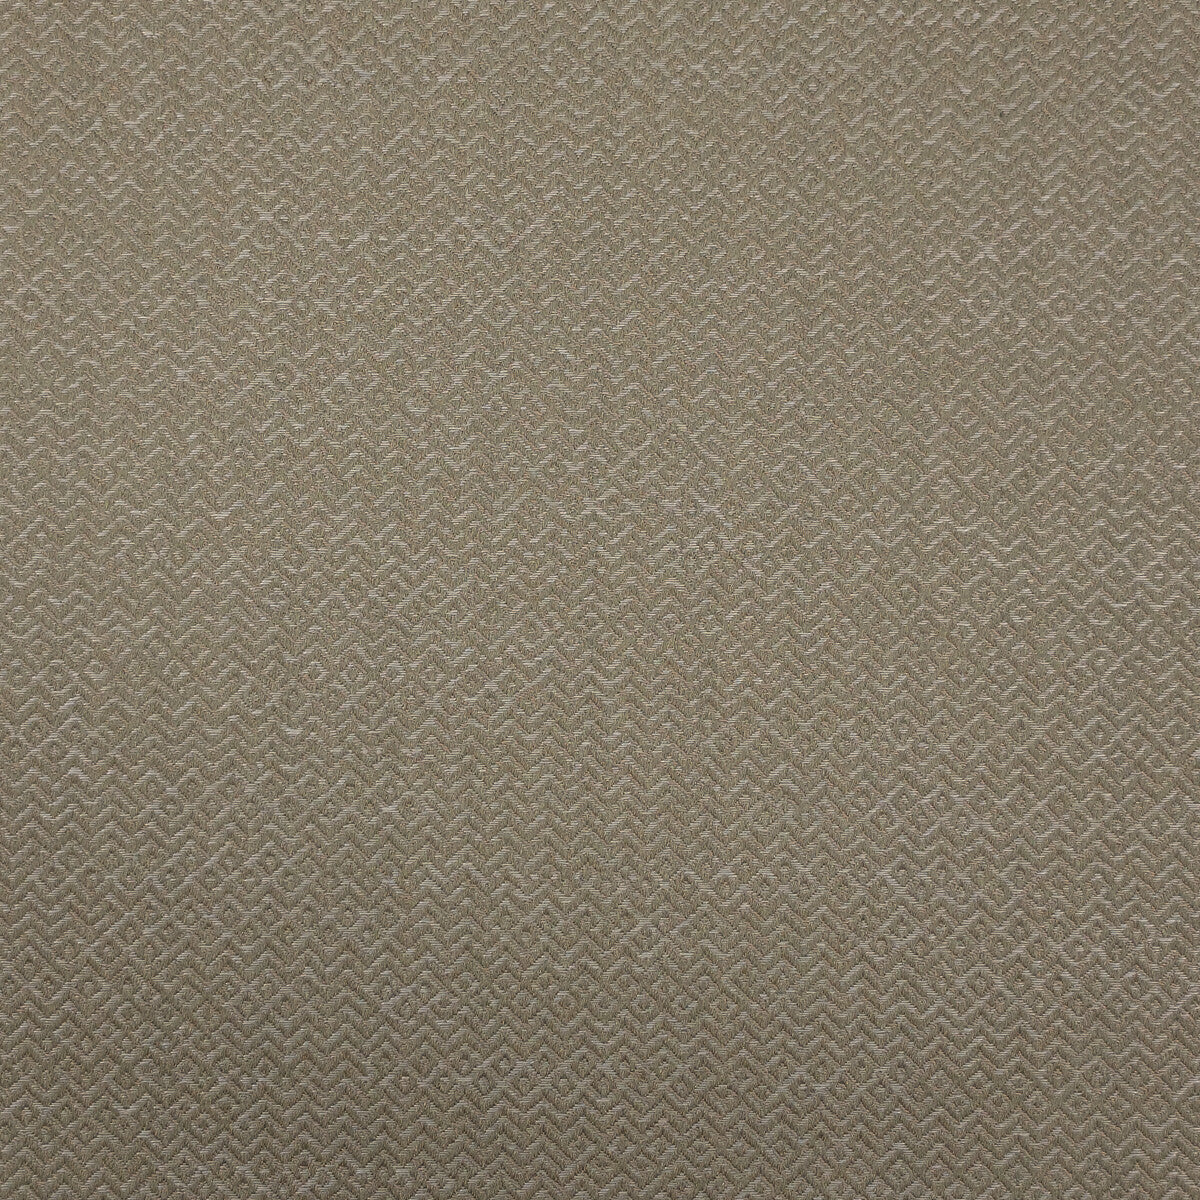 Kf Des fabric - pattern LZ-30203.16.0 - by Kravet Design in the Lizzo collection